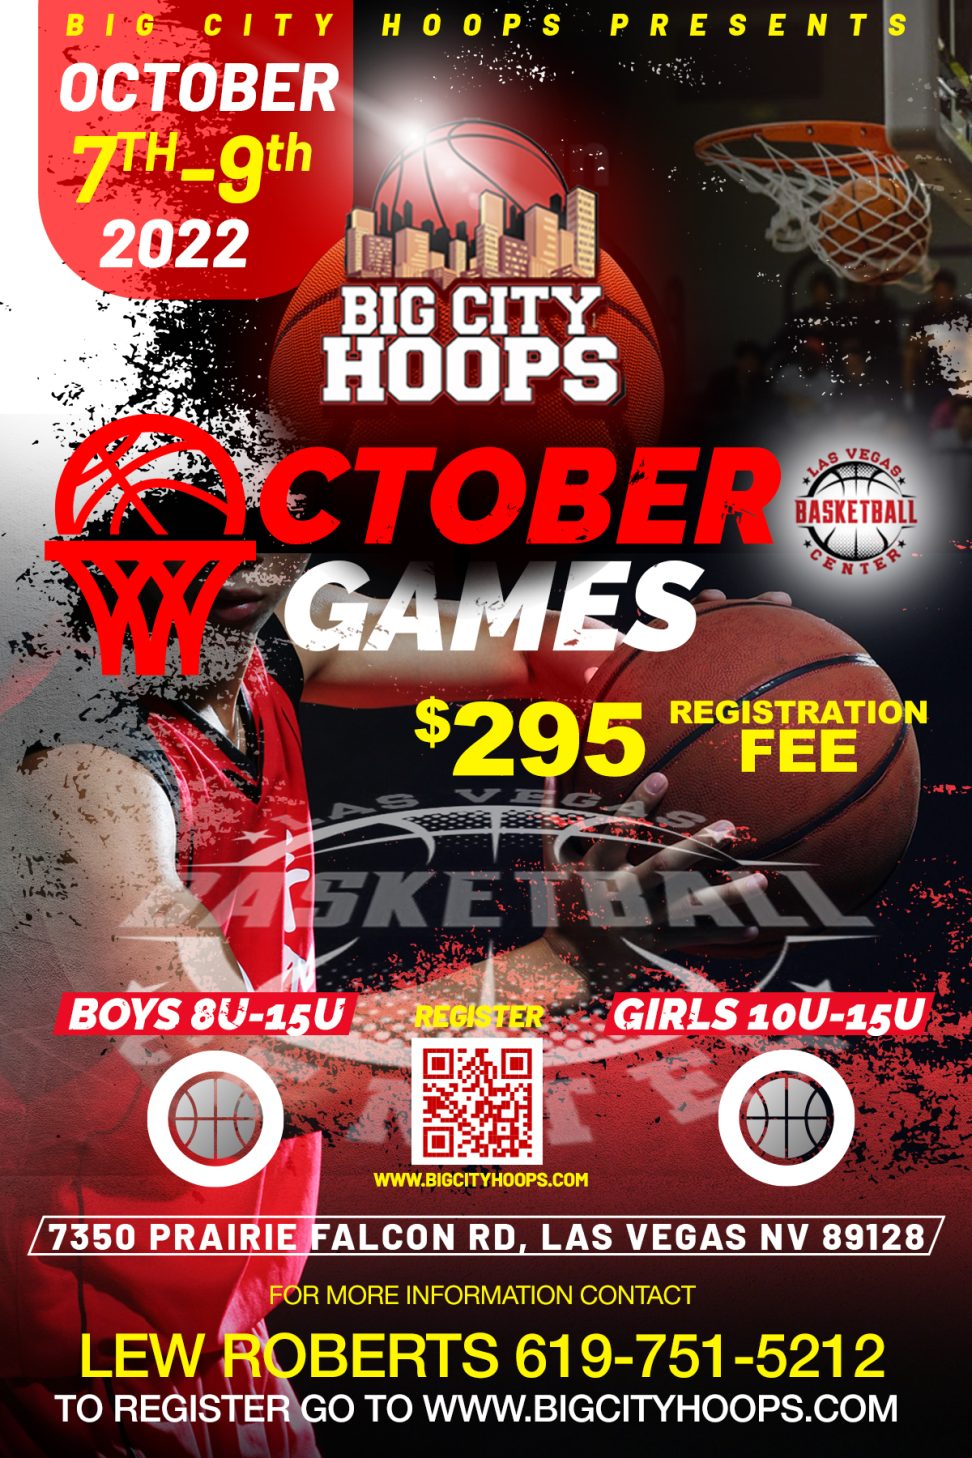 A poster for the big city hoops basketball games.